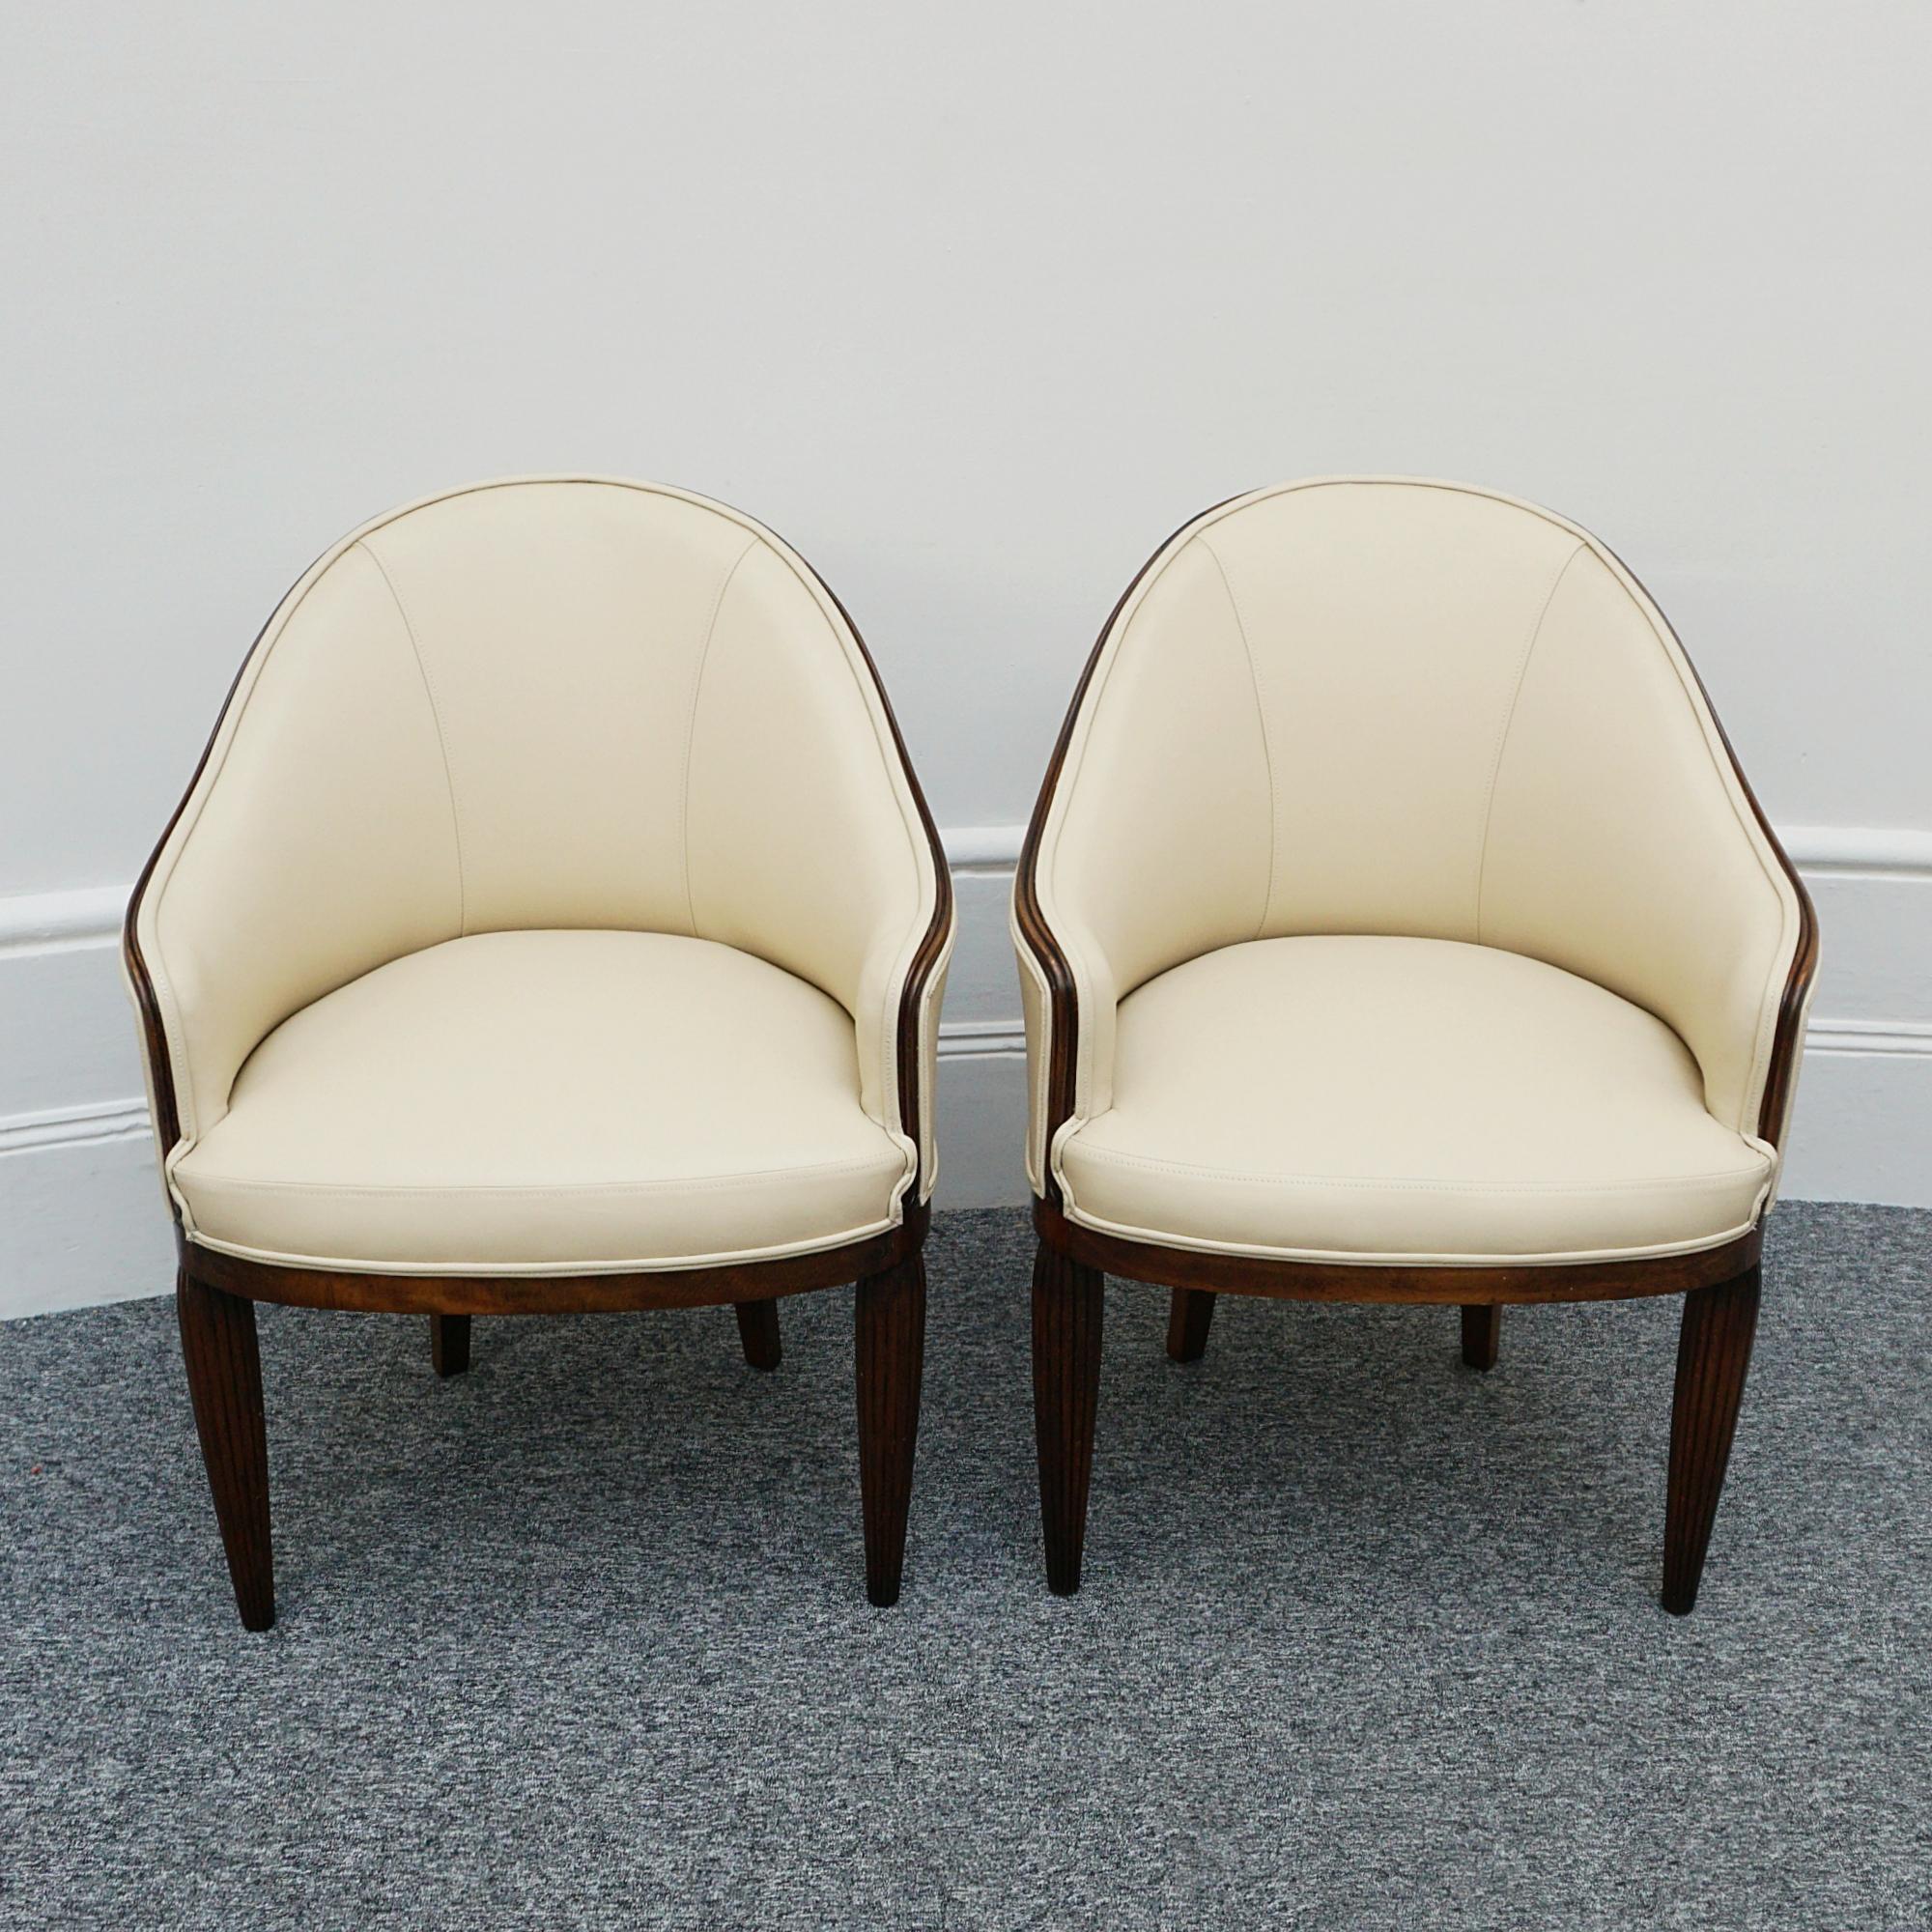 Pair of Cream Leather Upholstered French Art Deco Tub Chairs 1